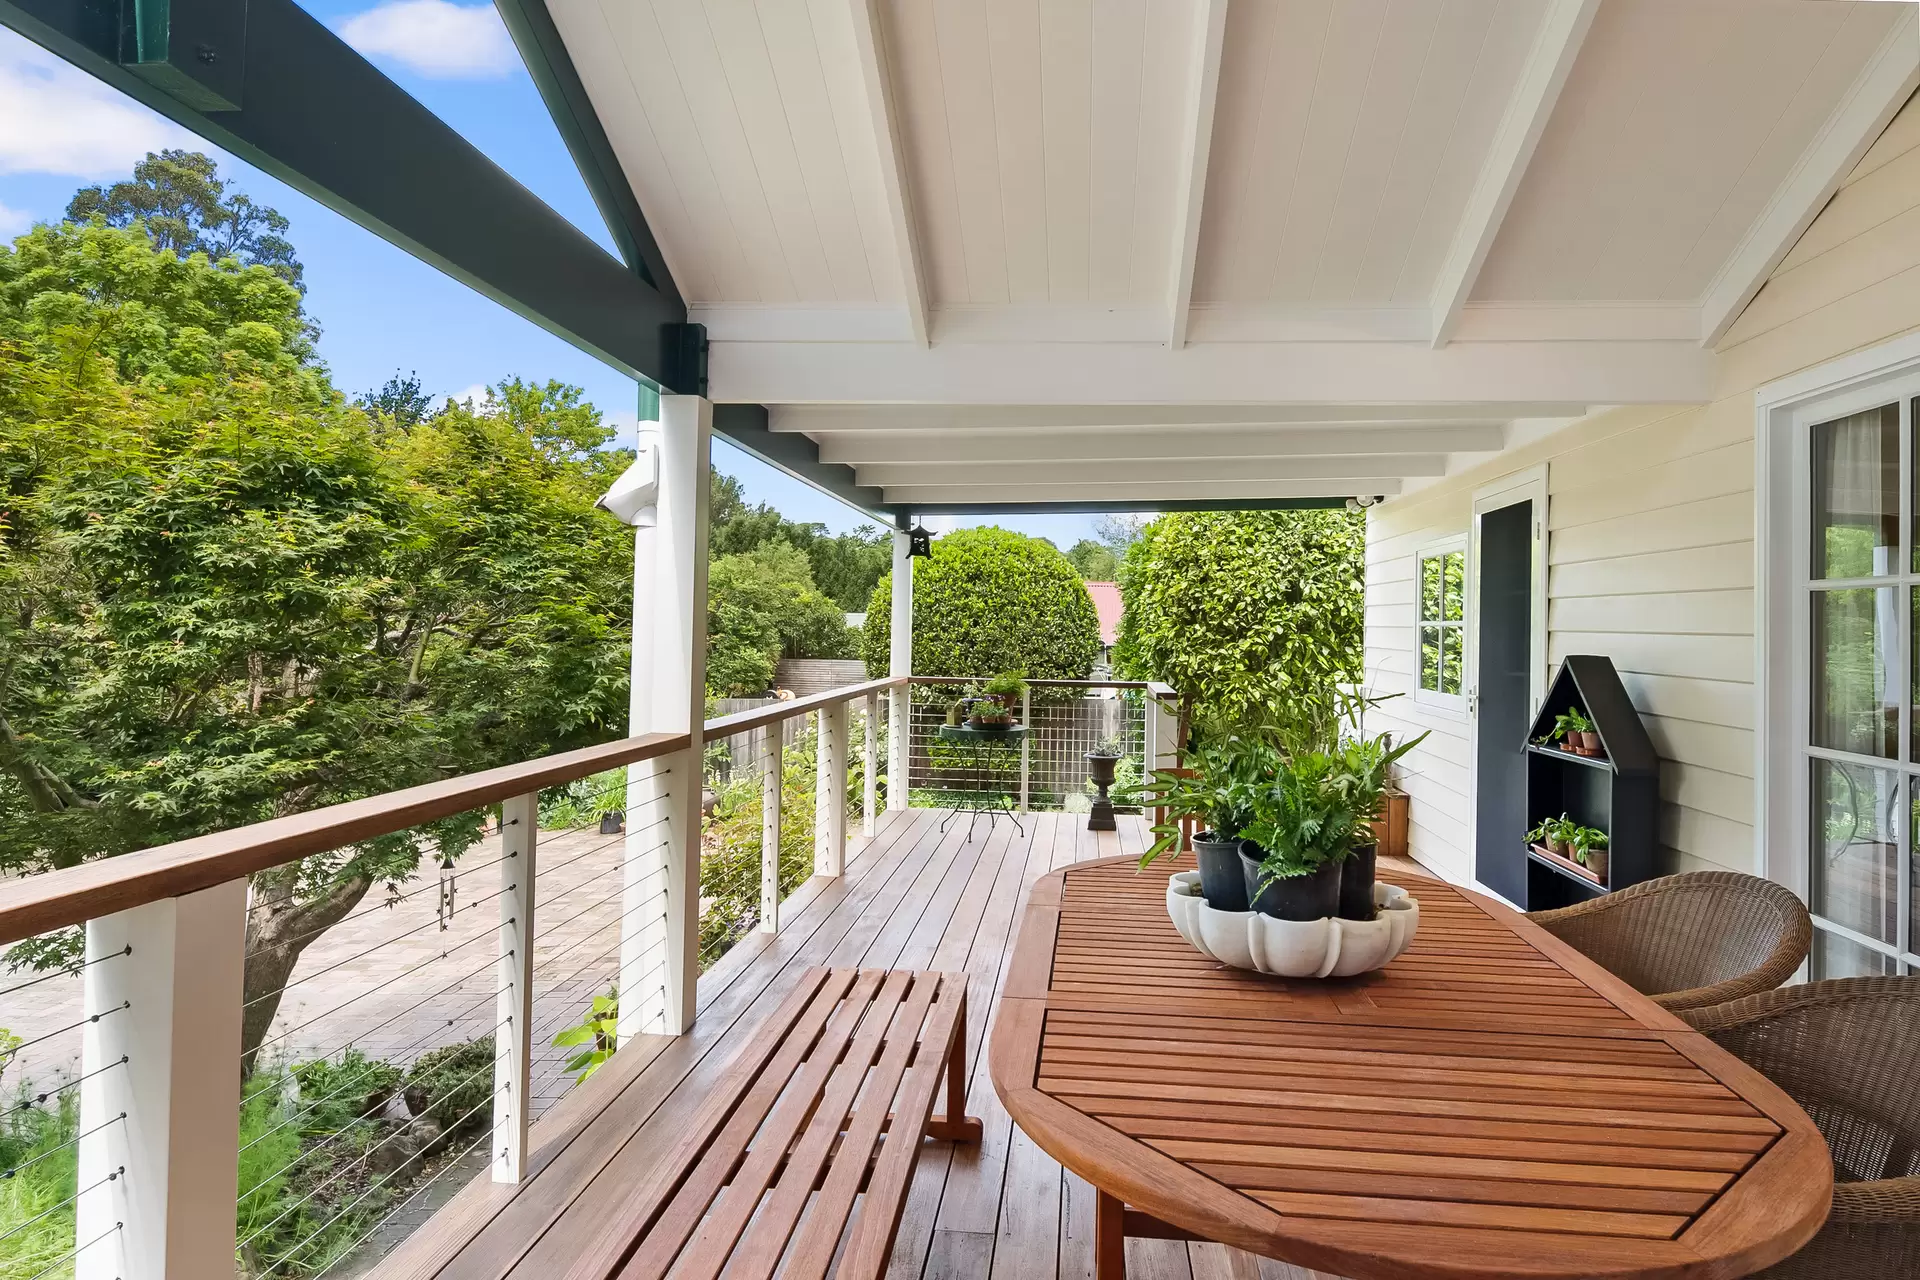 Photo #12: 76 Merrigang Street, Bowral - Sold by Drew Lindsay Sotheby's International Realty